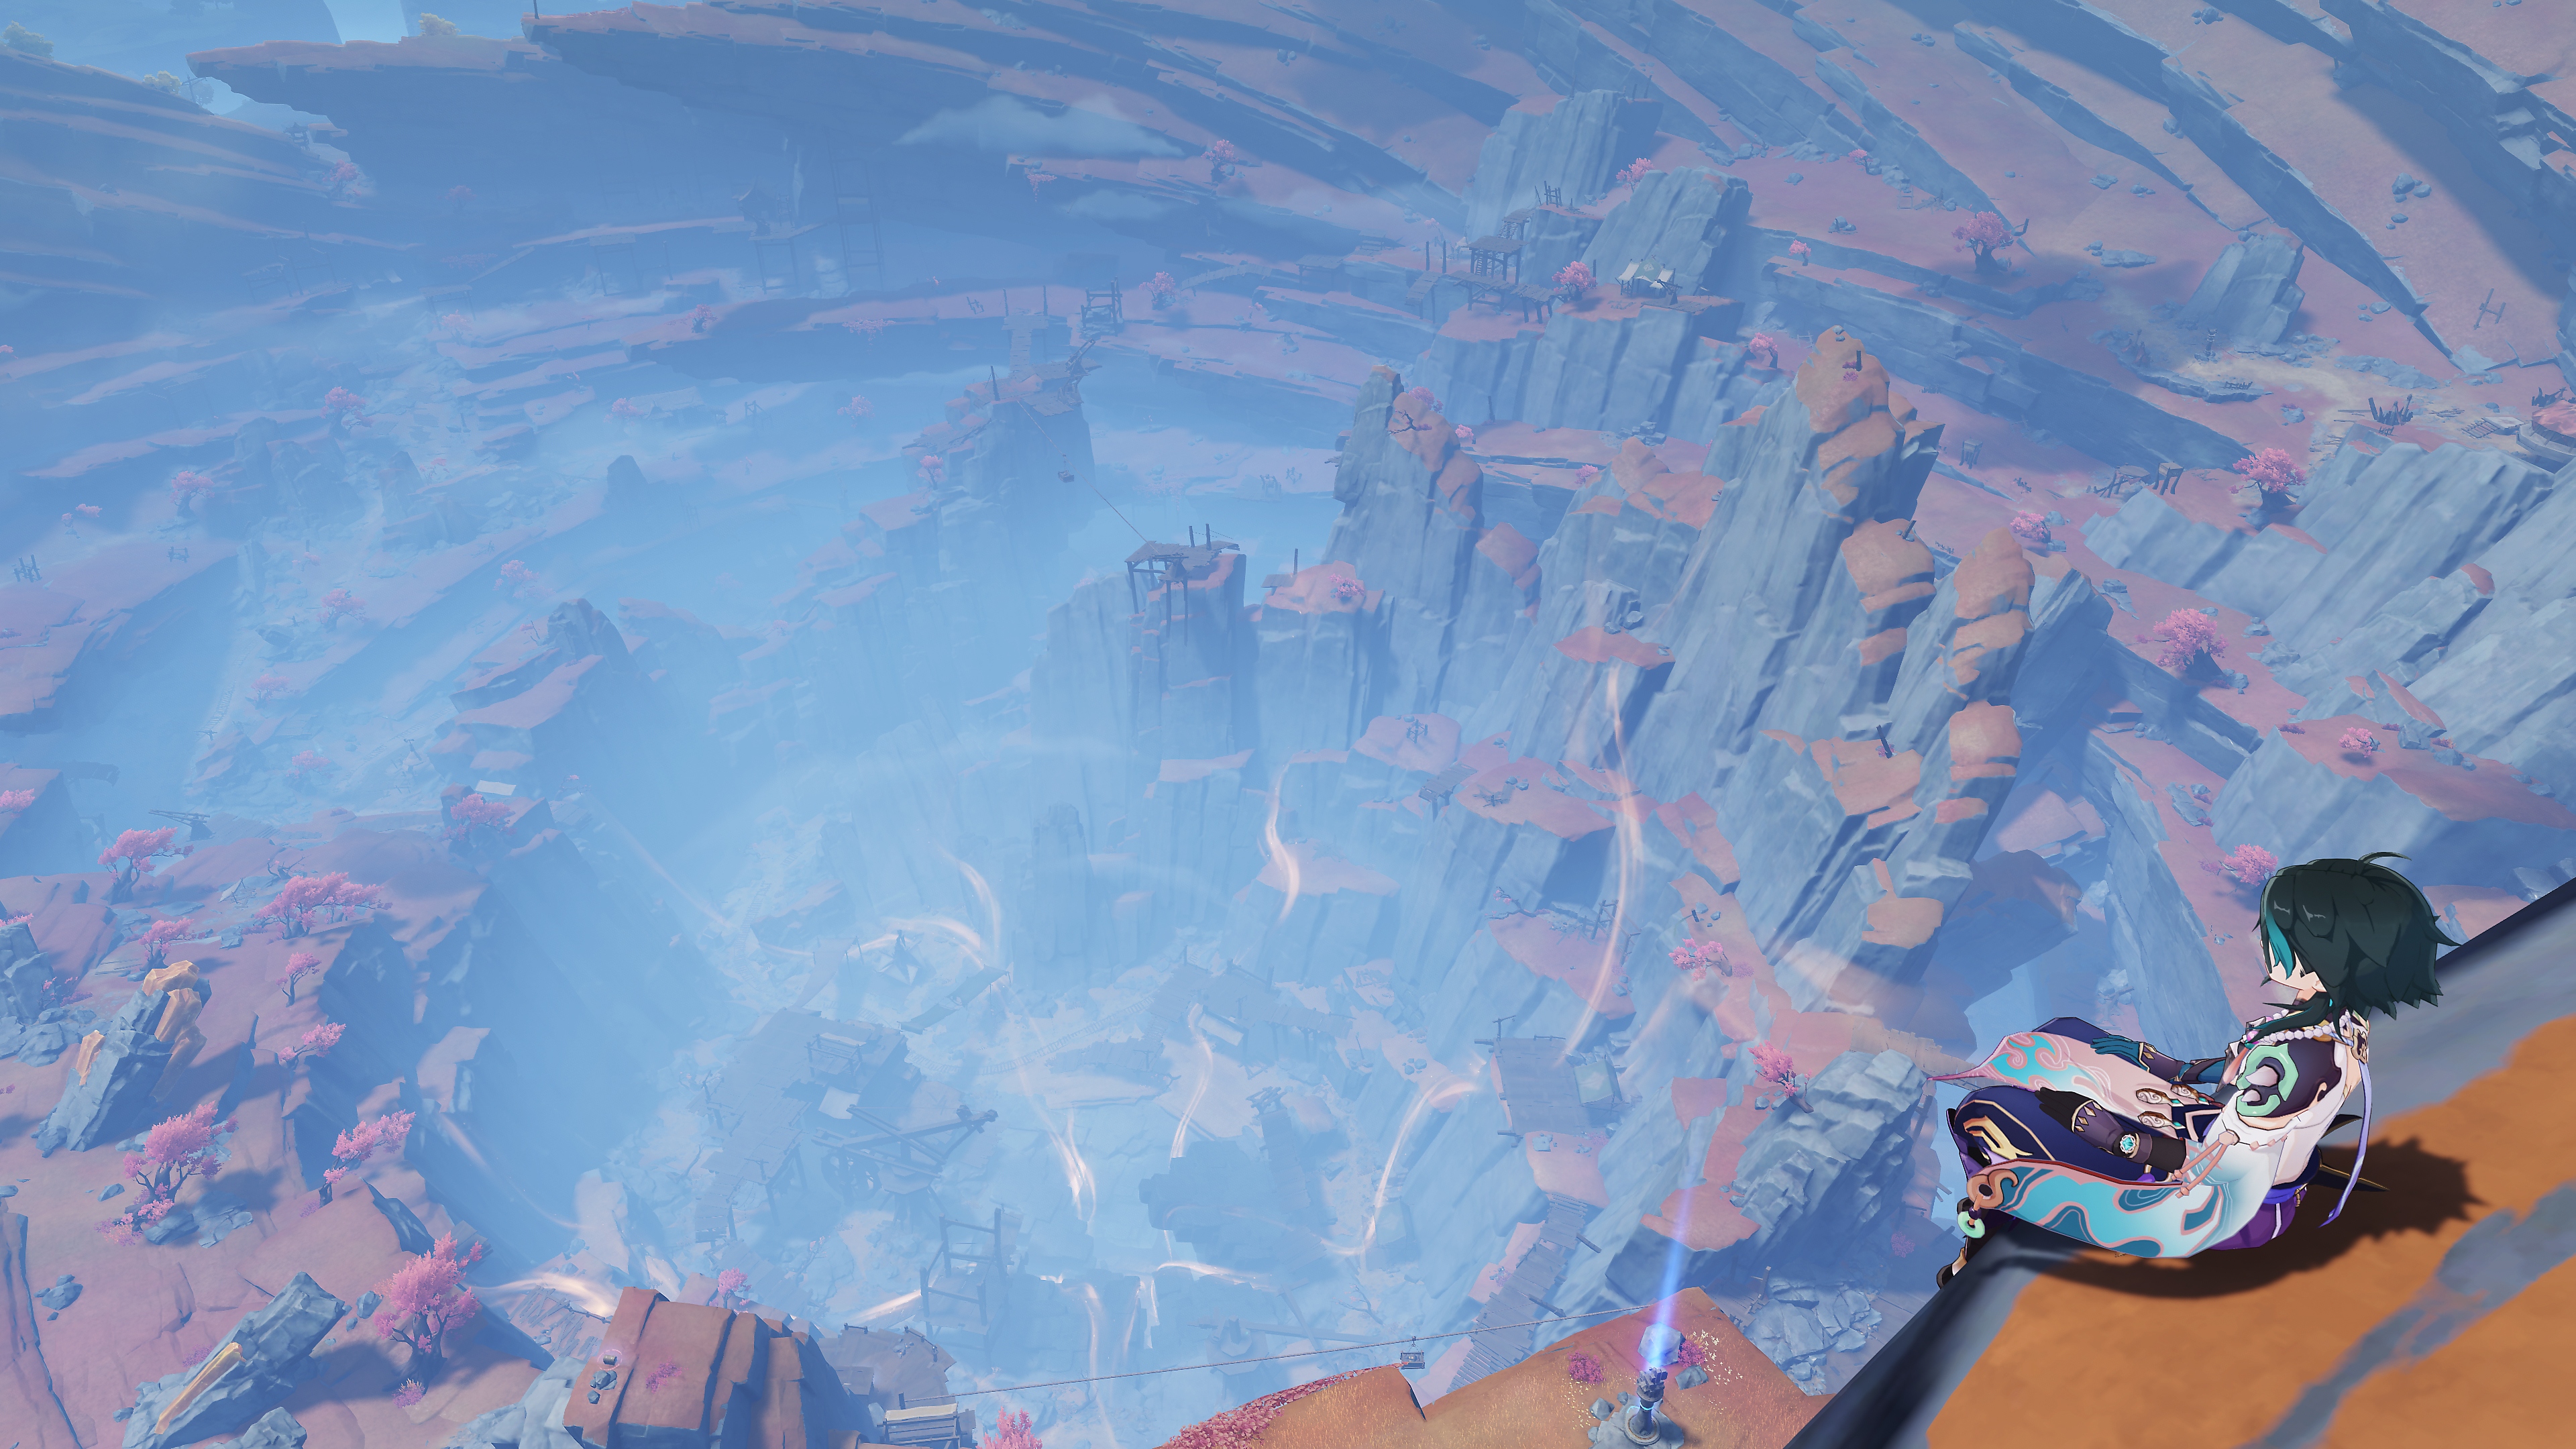 Genshin Impact: 2.7 update screenshot showing a character sitting on the edge of a high cliff overlooking the landscape below